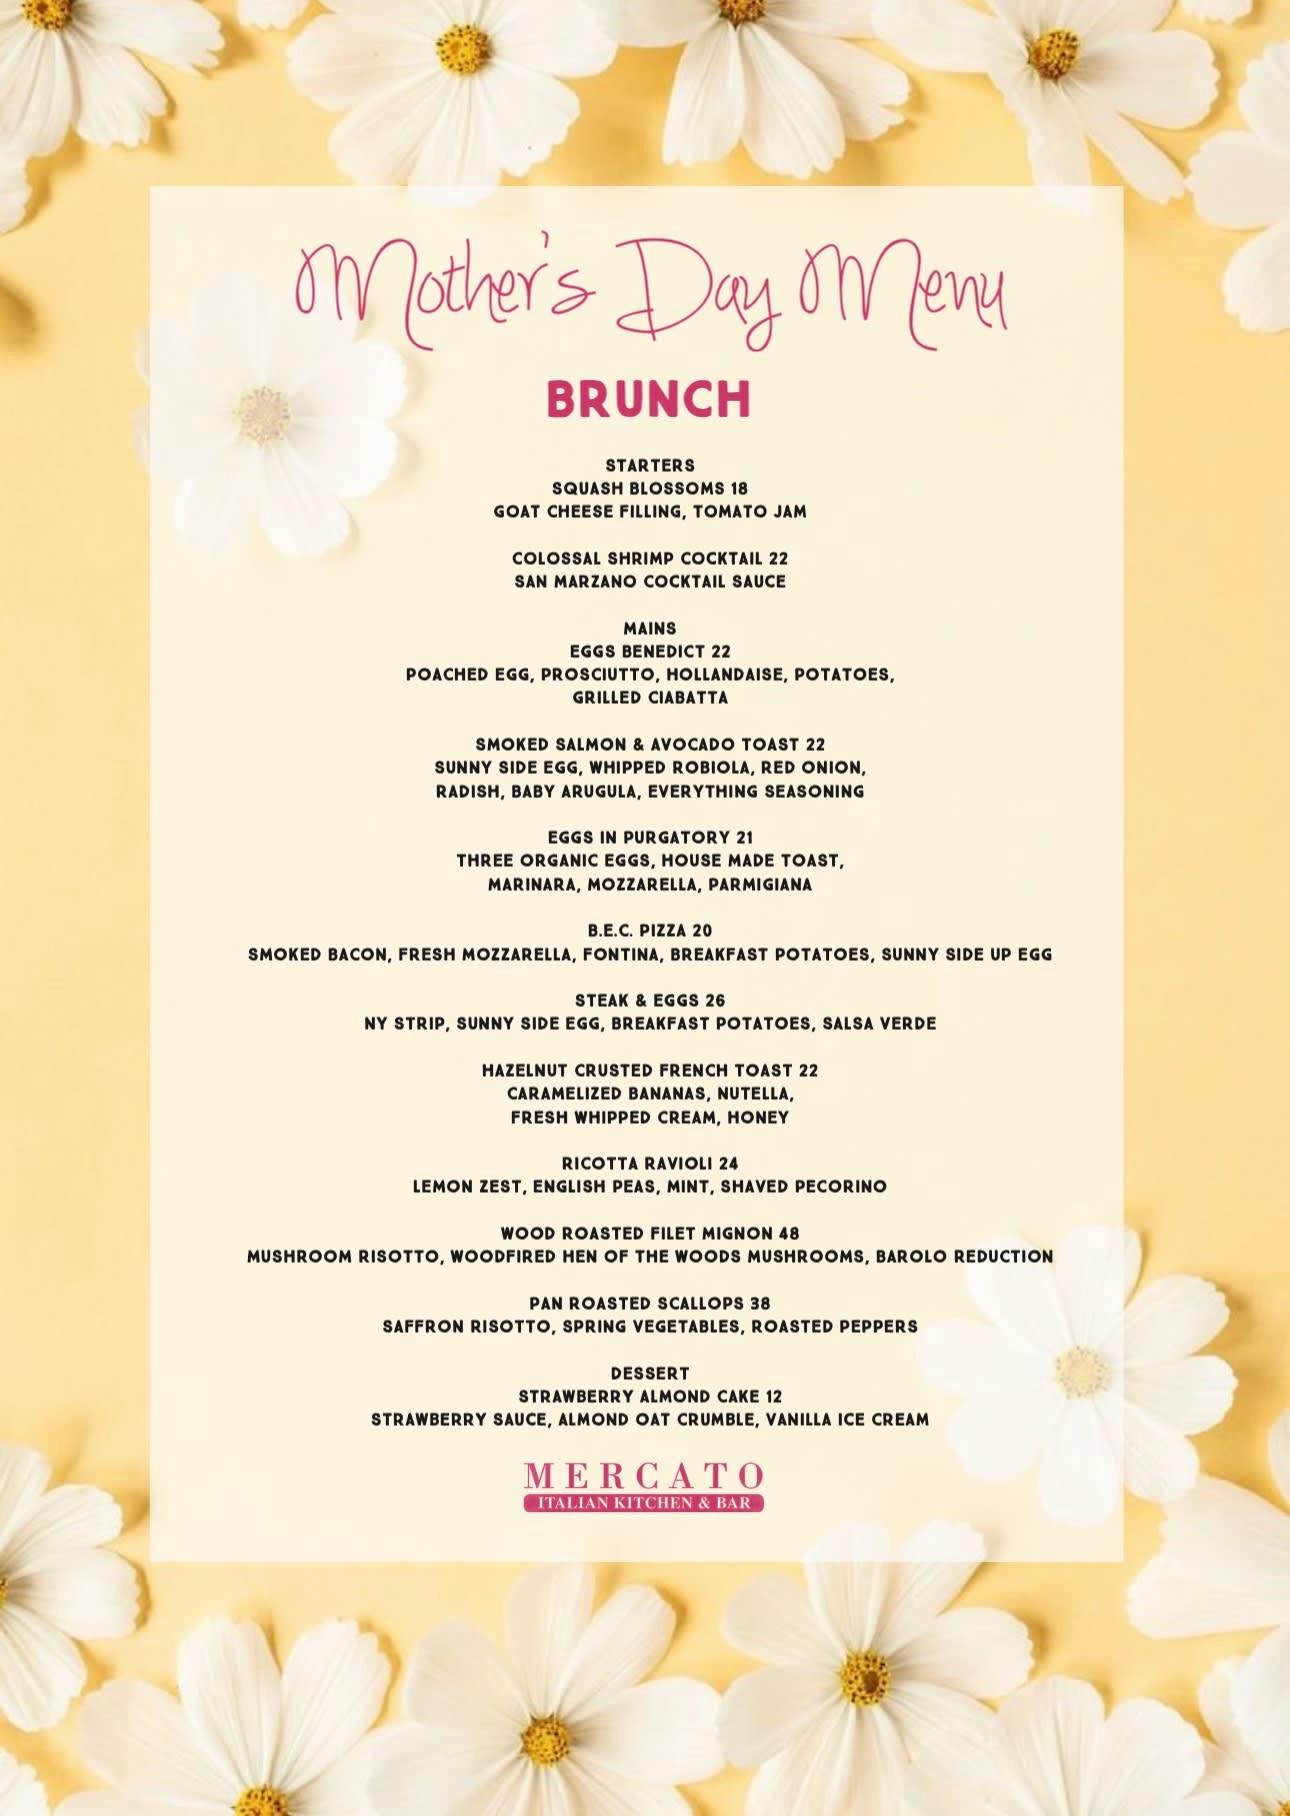 🥂💐 HEY MOMS!! 💐🥂

MOM-OSA, MOM-TINI, MOM-GARITA, BRUNCH…
WE HAVE IT ALL FOR YOU THIS SUNDAY!!

MAKE YOUR RESERVATIONS NOW!